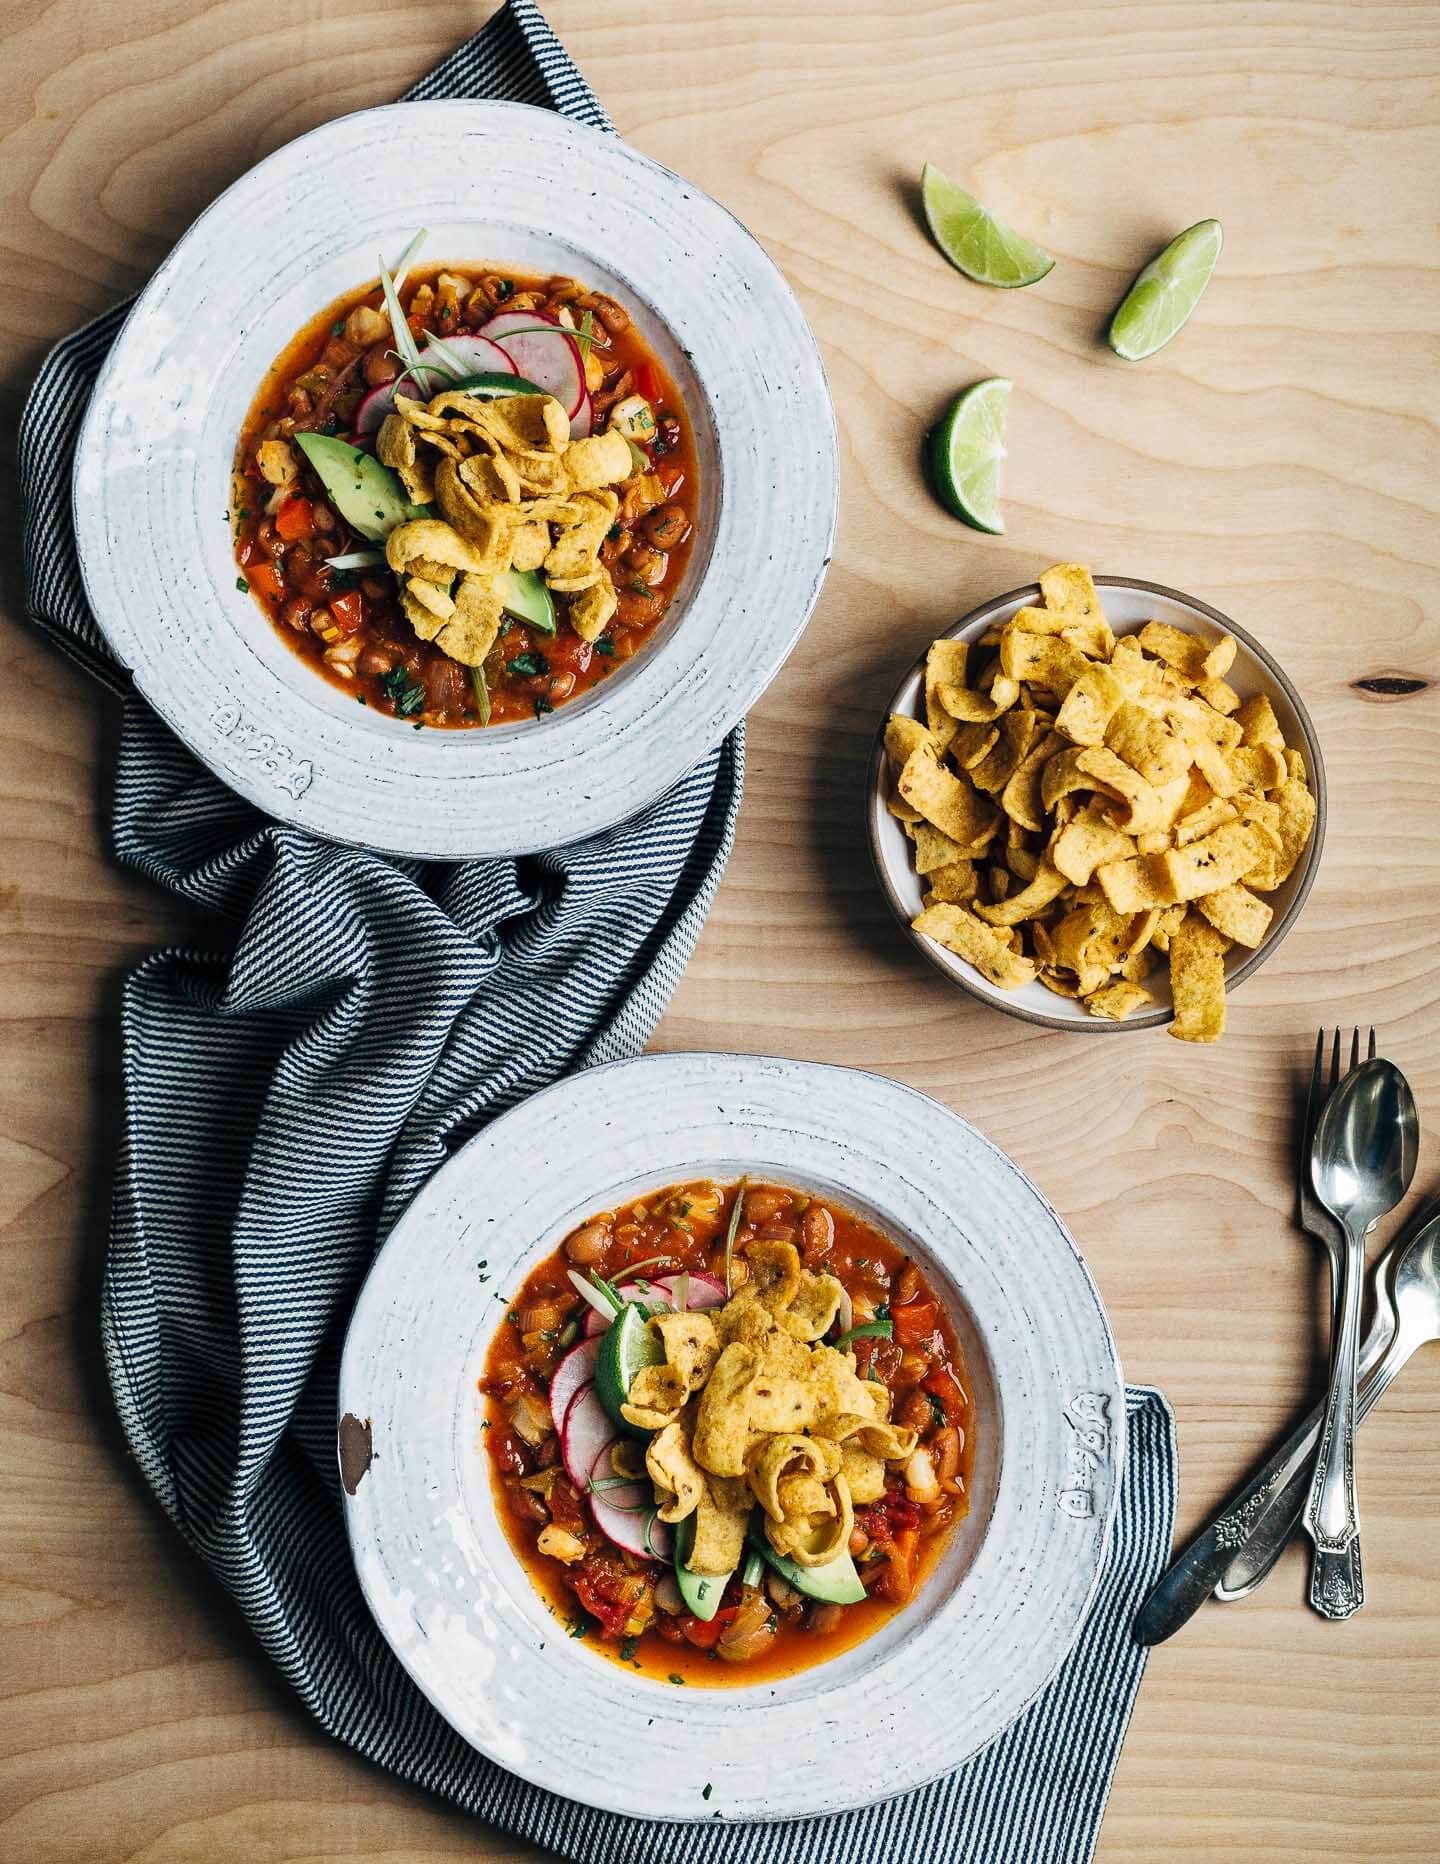 Hearty pinto bean chili with a flavorful tomato base flecked with leeks, chili peppers, and hominy and topped with fresh cilantro, lime, sliced avocado and radish, and crunchy corn chips.